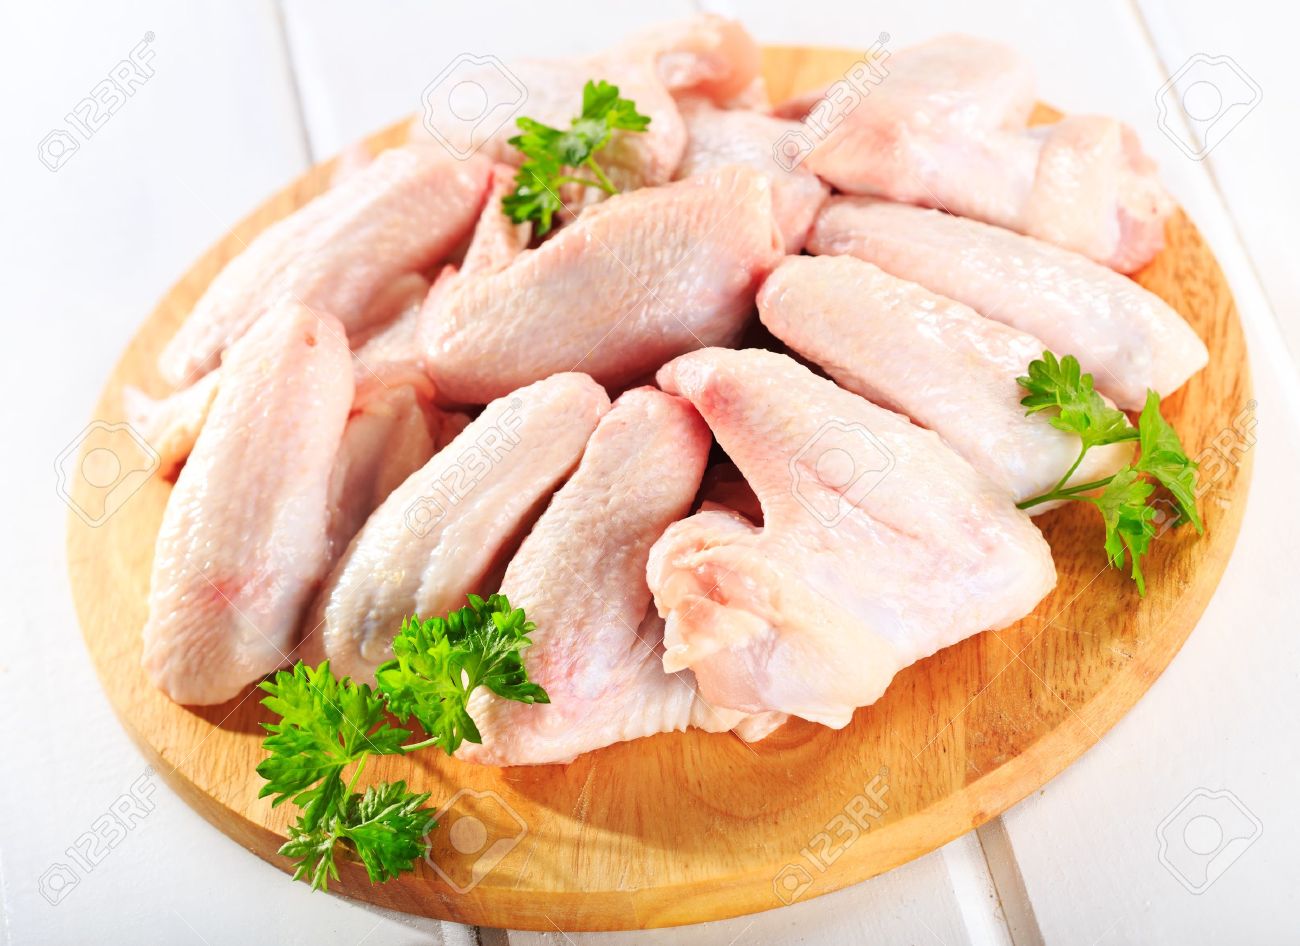 20308078-raw-chicken-wings-on-chopping-board-with-parsley-Stock-Photo-meat.jpg